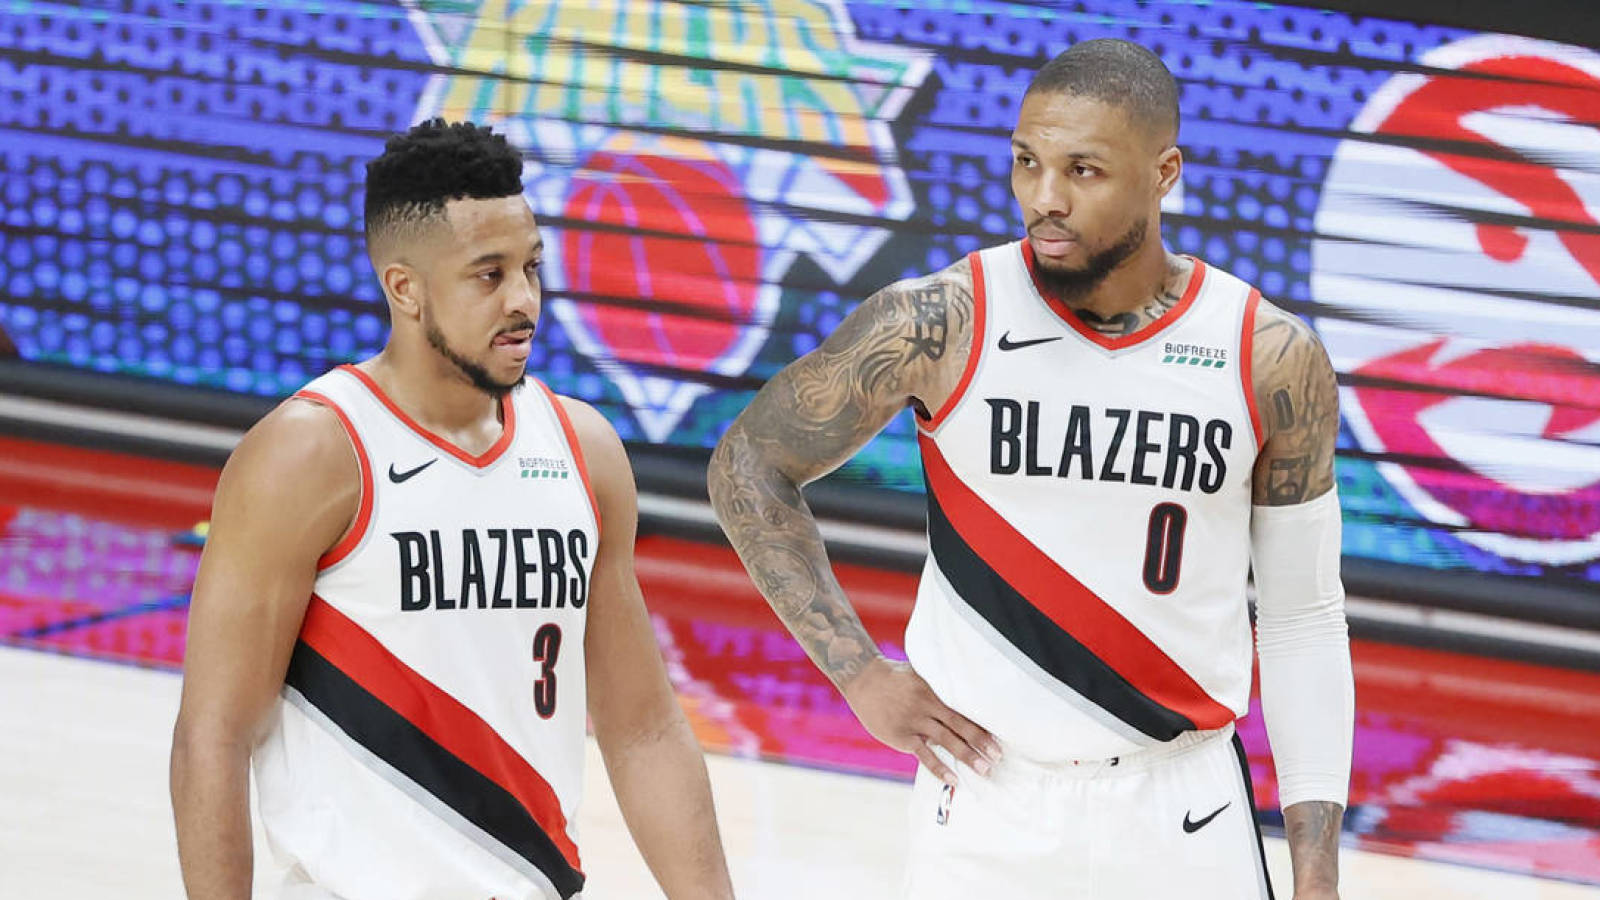 CJ McCollum and Dame do not fit together